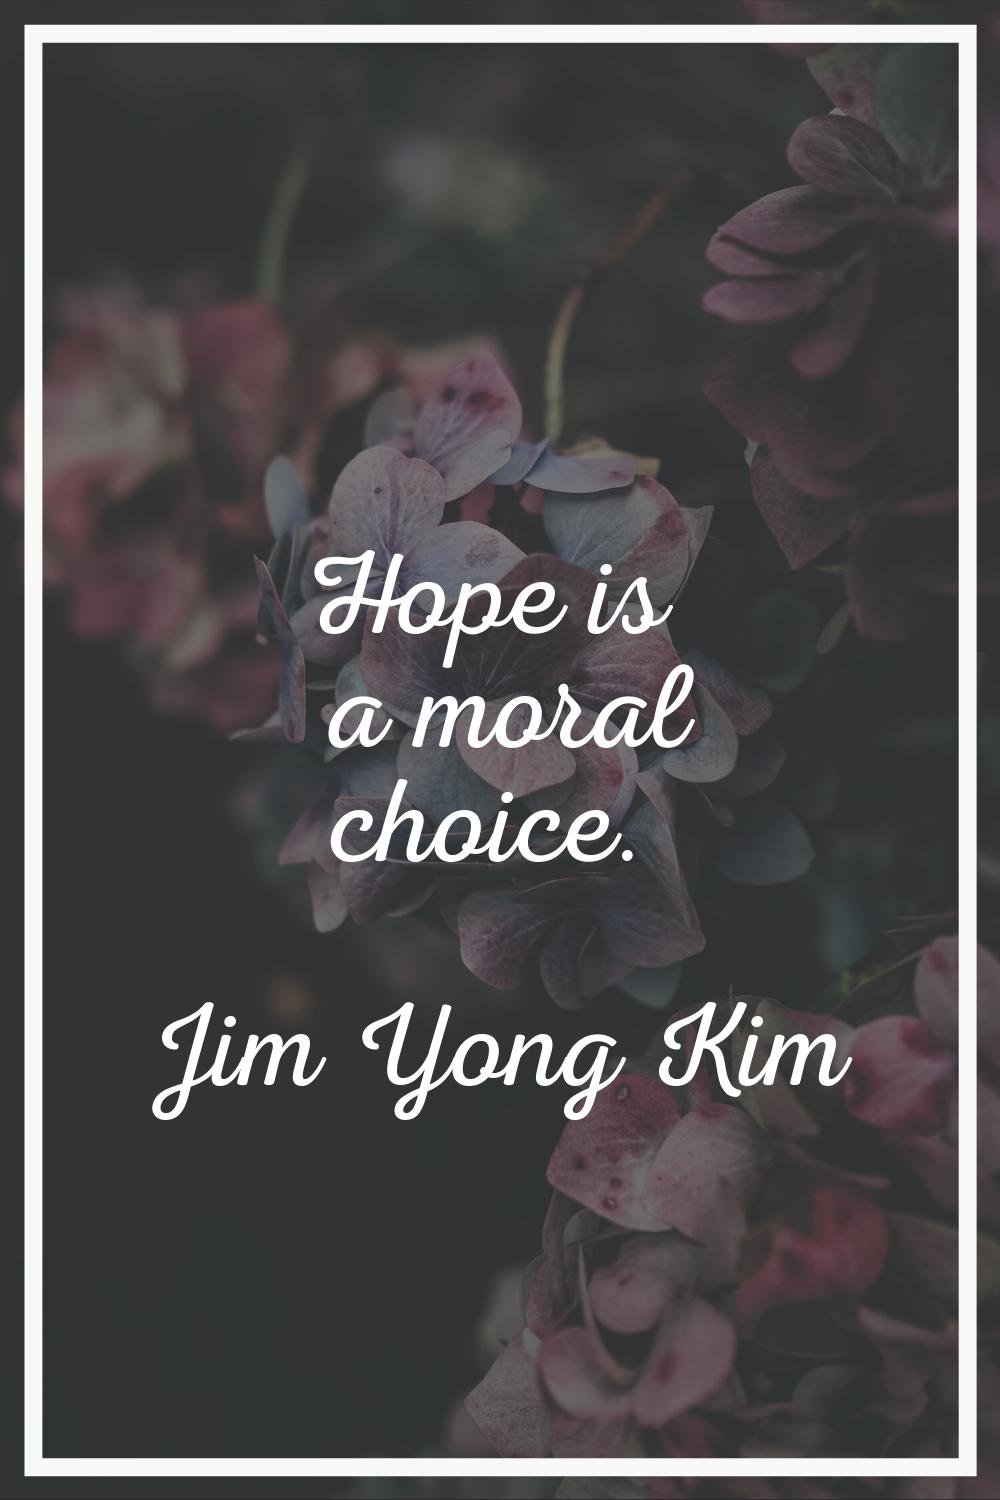 Hope is a moral choice.